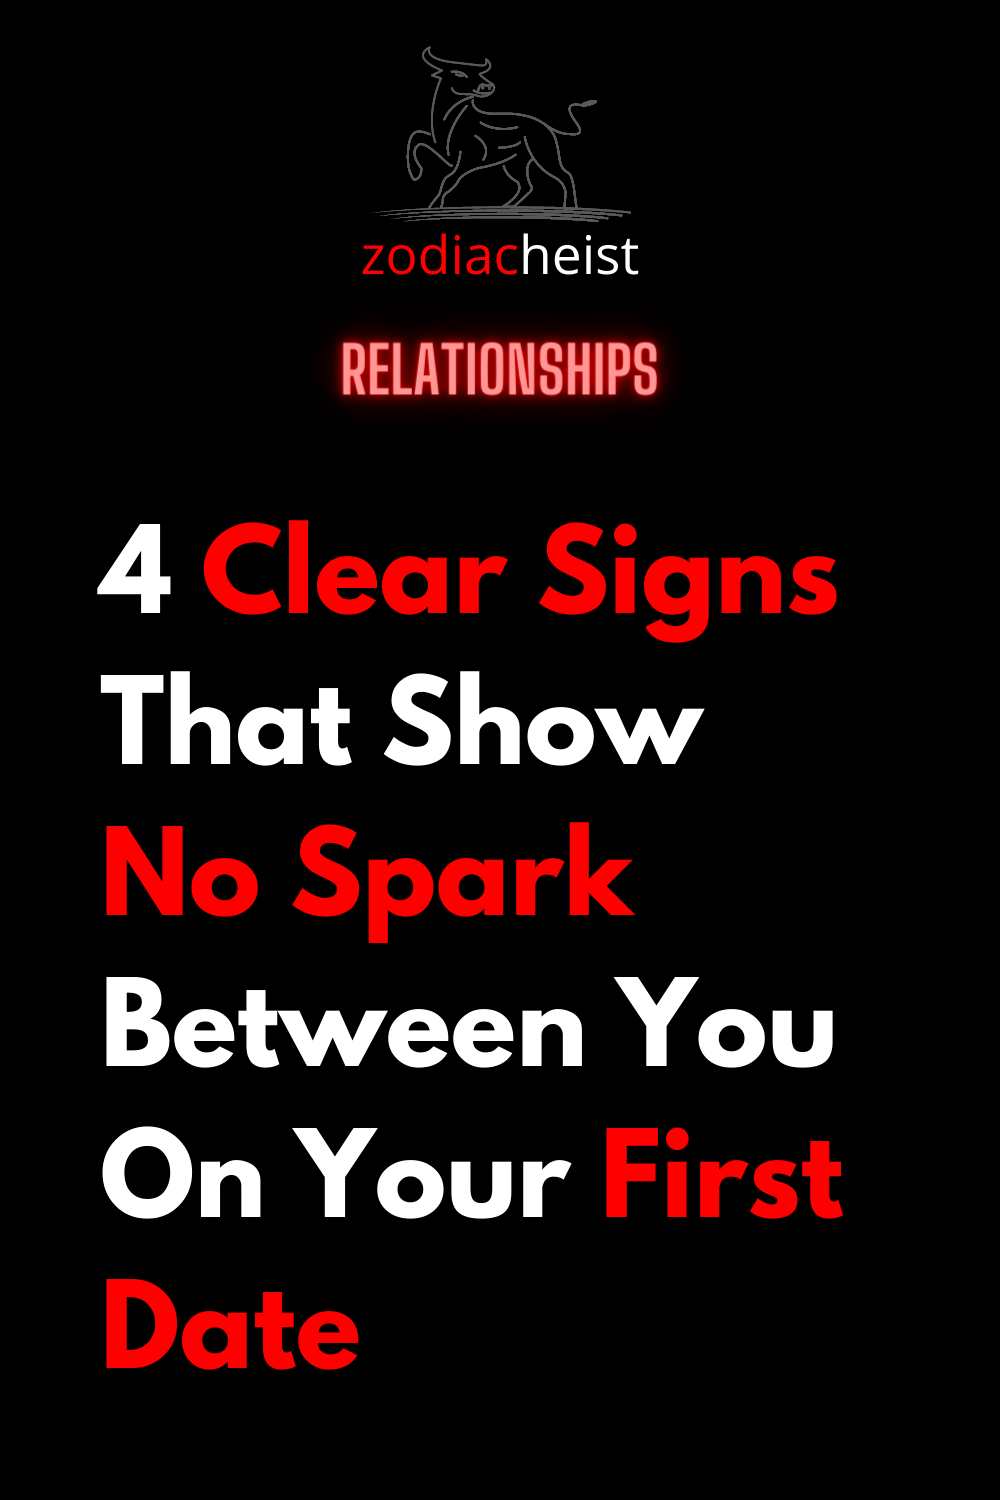 4 Clear Signs That Show No Spark Between You On Your First Date.